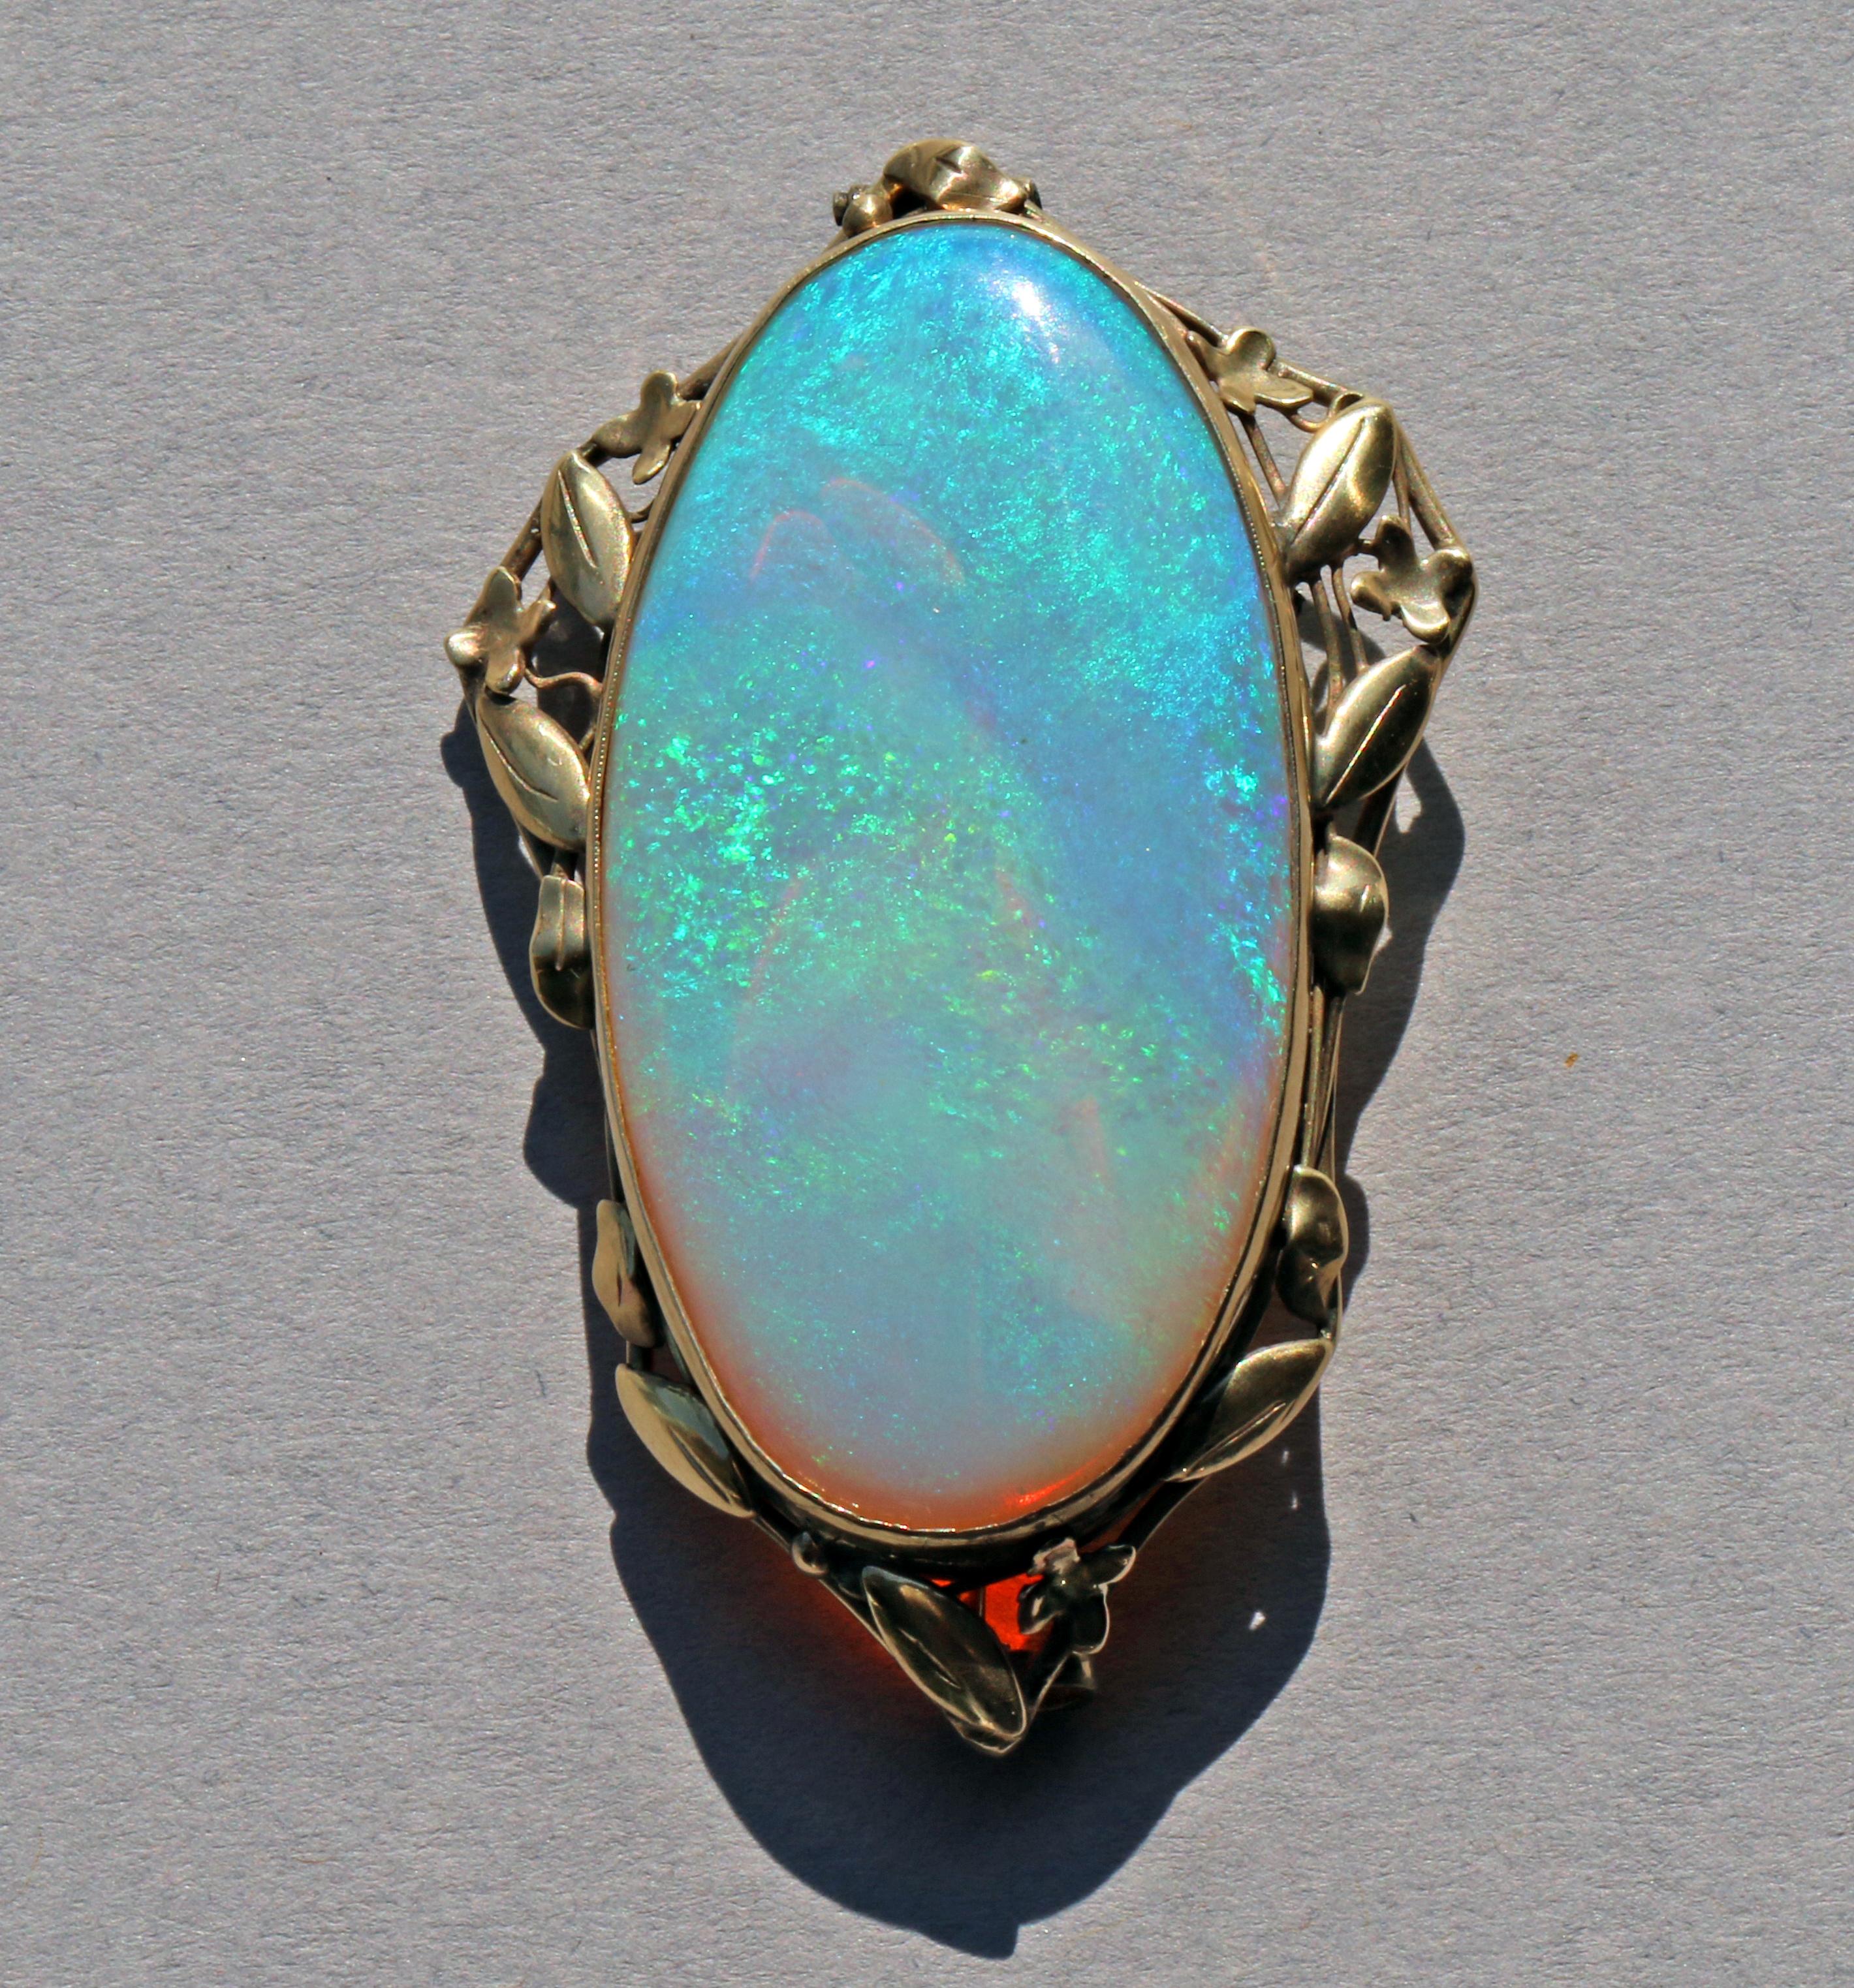 An impressive Arts & Crafts brooch by Rhoda Wager.
The fabulous precious opal is approximaety 60 carats, mounted in gold.
llustrated in our book:
Beatriz Chadour-Sampson & Sonya Newell-Smith, Tadema Gallery London Jewellery from the 1860s to 1960s,